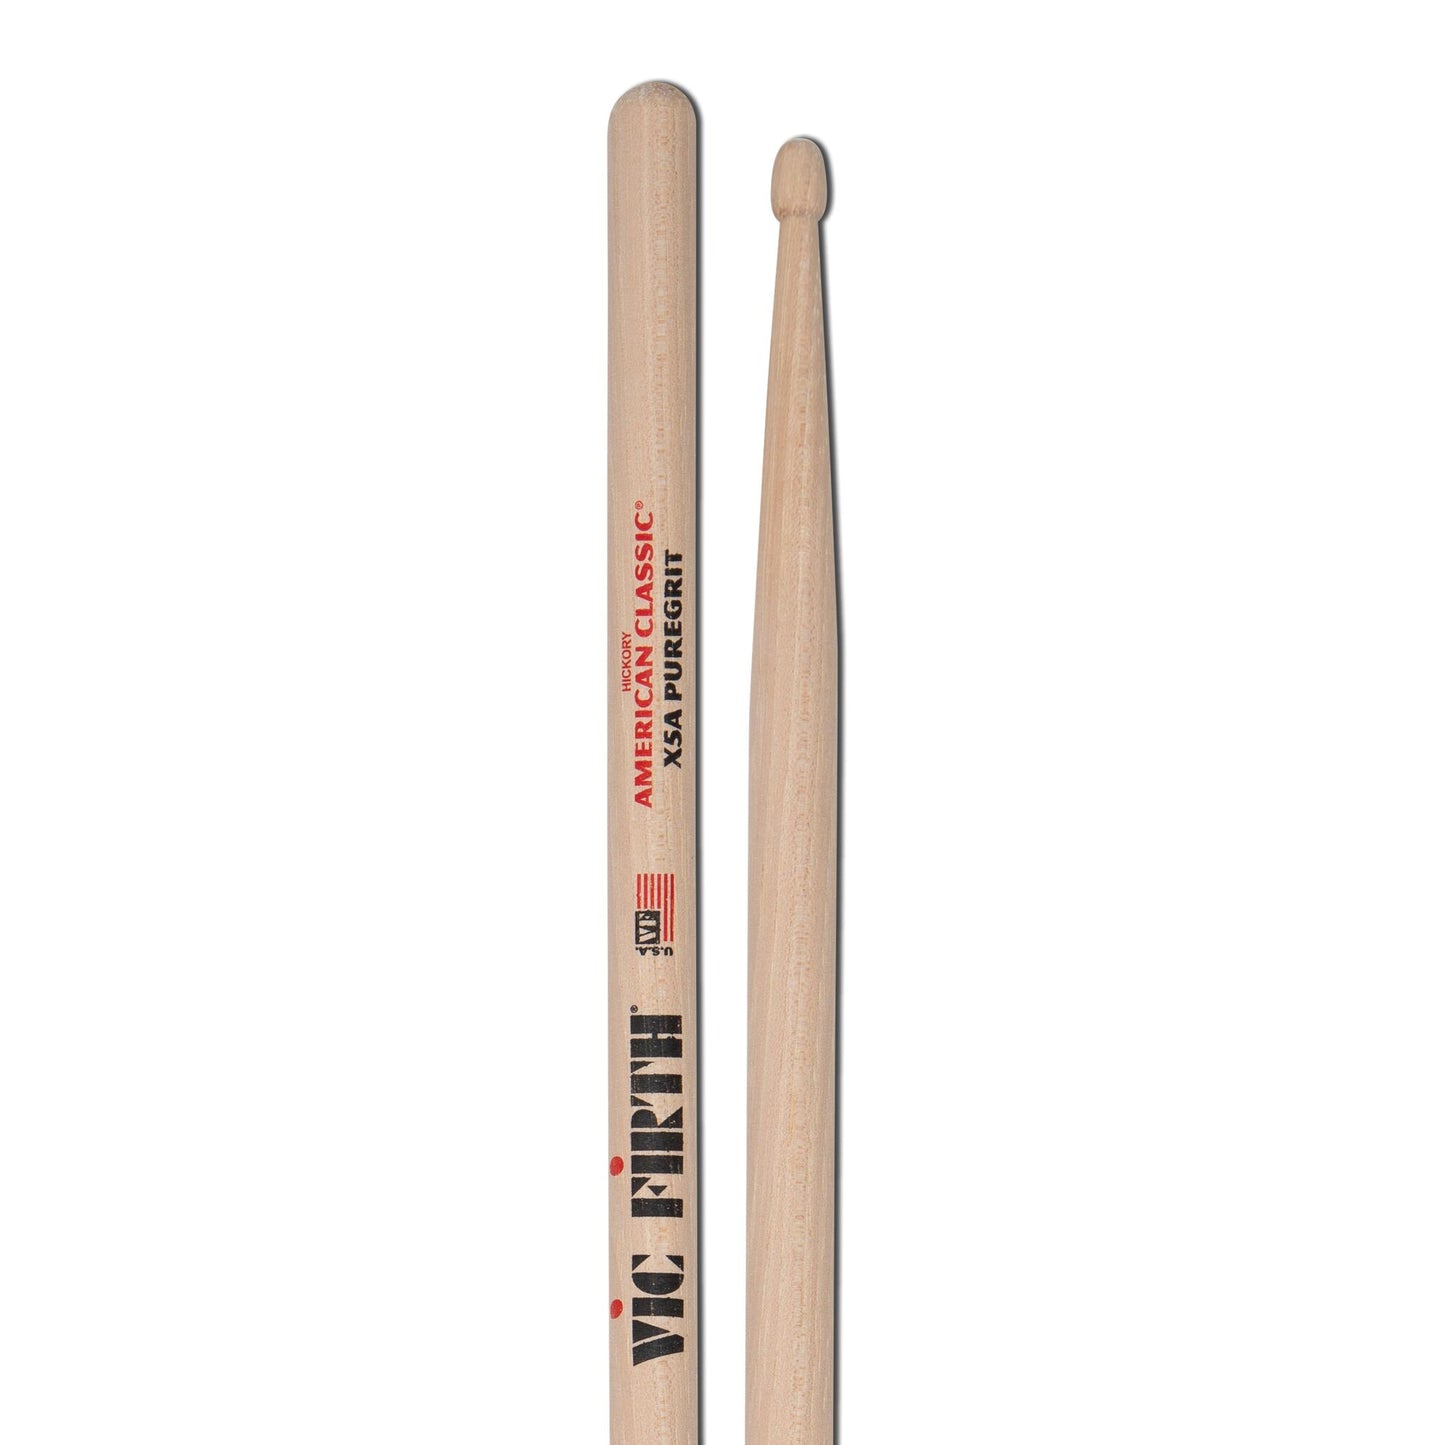 American Classic® Extreme 5A Vic Grip Drumsticks